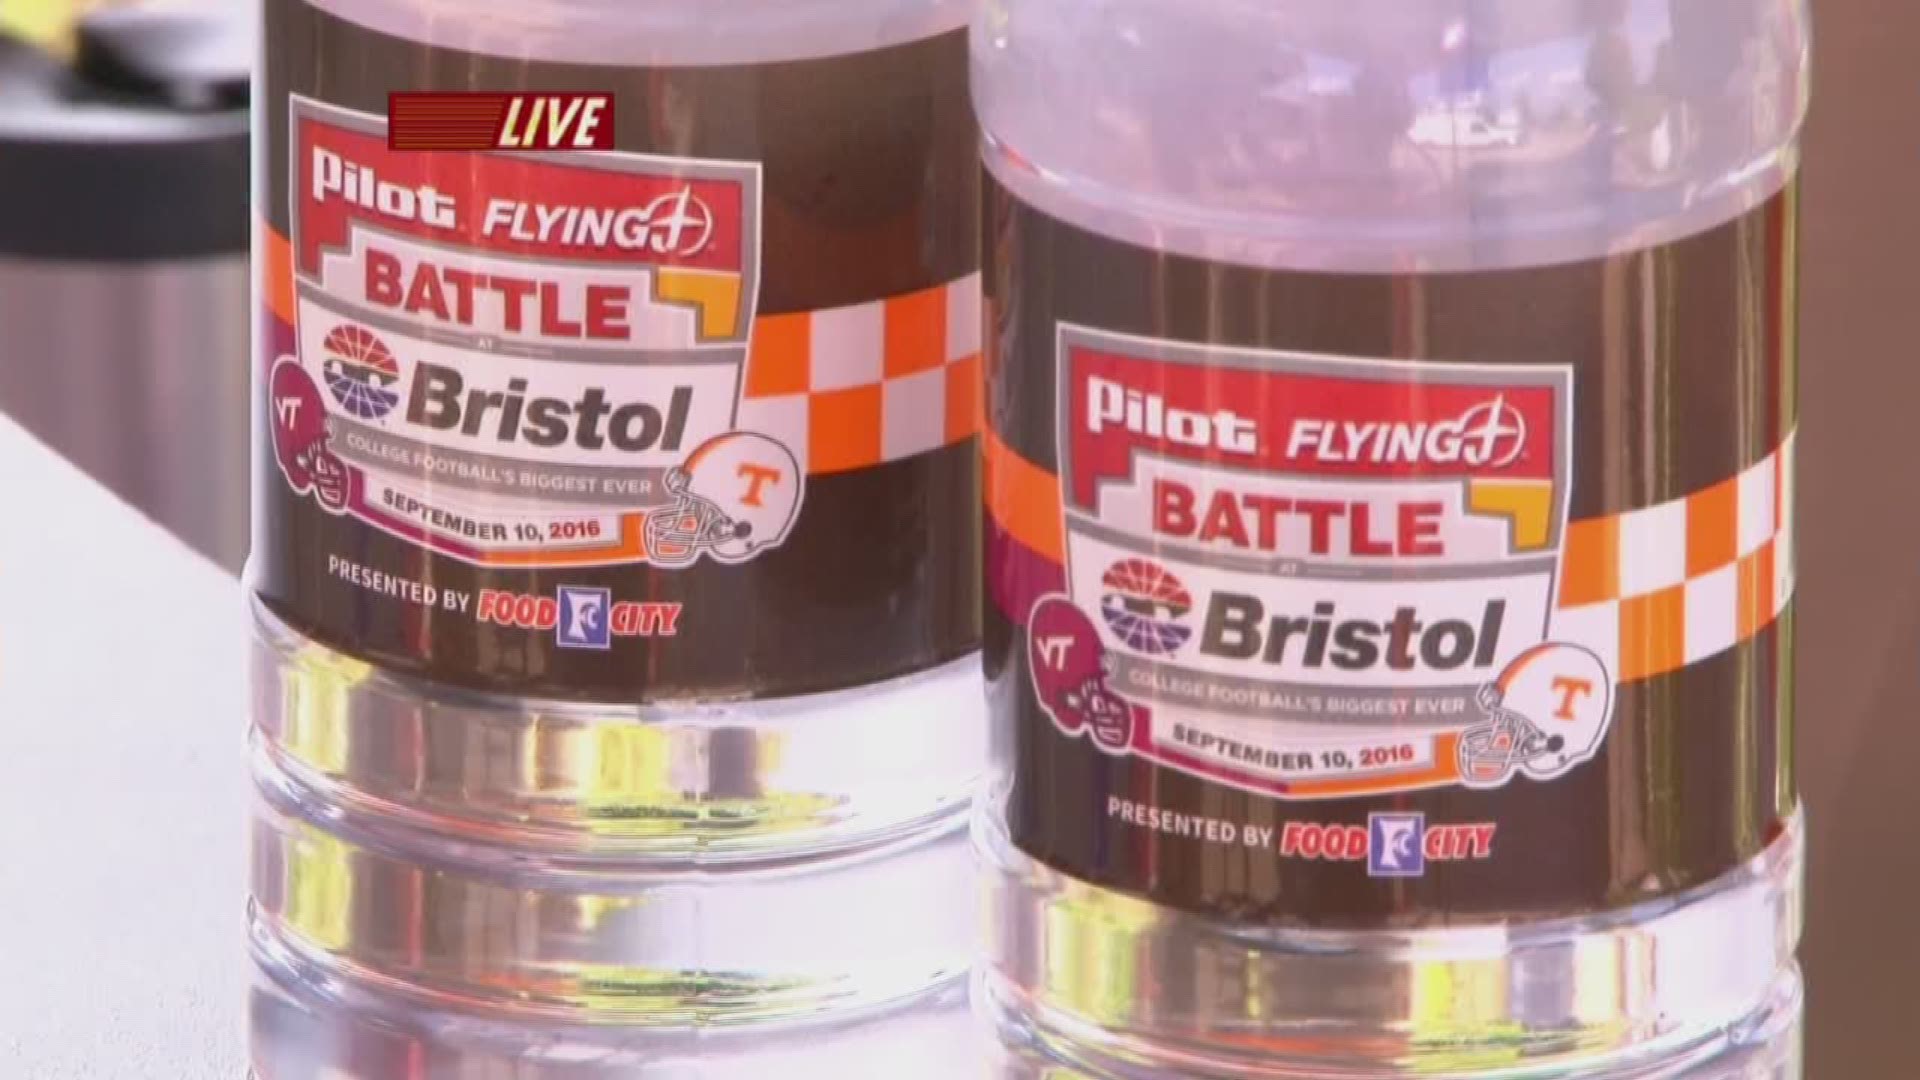 September 8, 2016Live at Five at 4A look at Hometown Spotlight sponsor Food City and their relationship with both the Bristol Motor Speedway and the Battle at Bristol. For more information visit foodcity.com